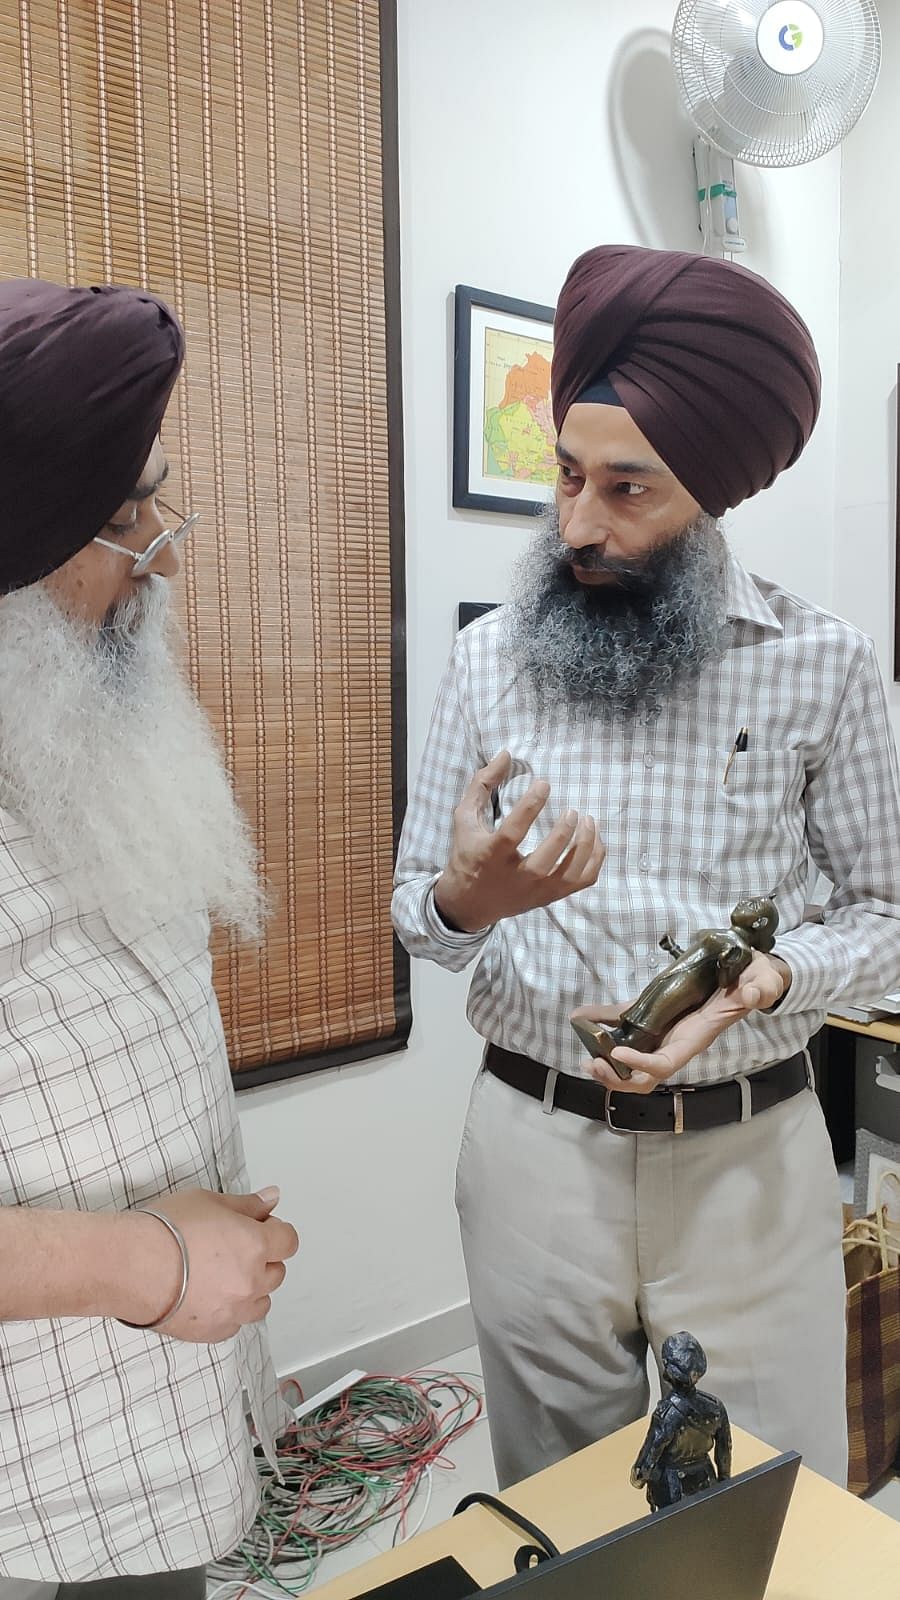 Davinder Pal (right) at the Panjab Digital Library in Chandigarh | By Special Arrangement